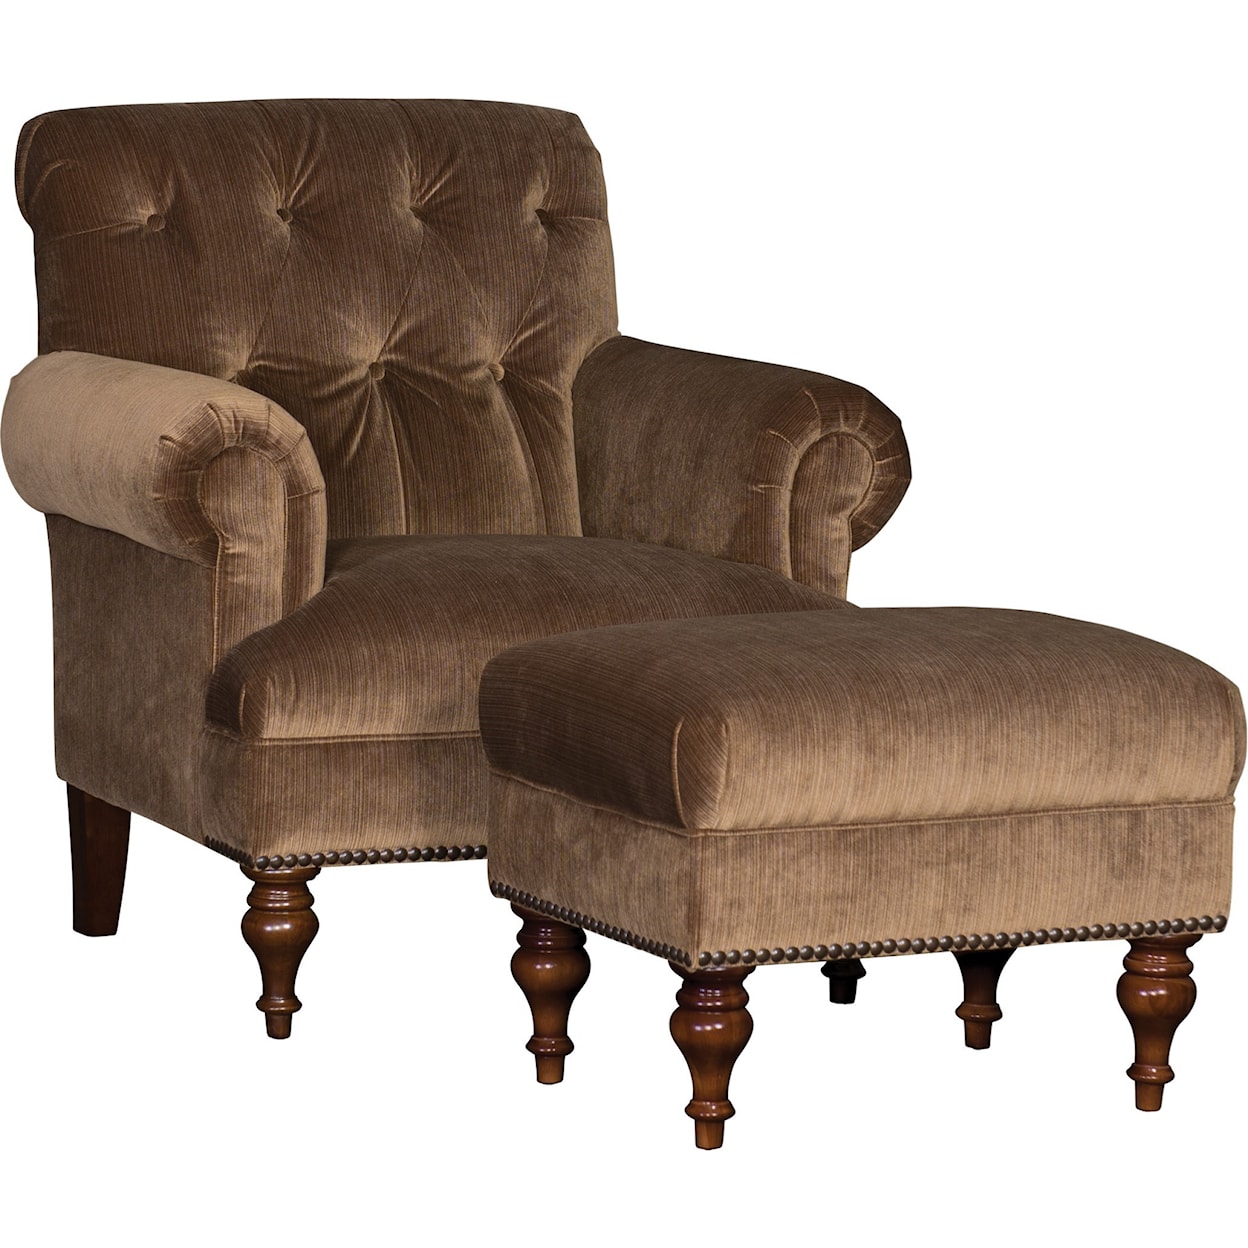 Mayo 3419 Tufted Back Chair